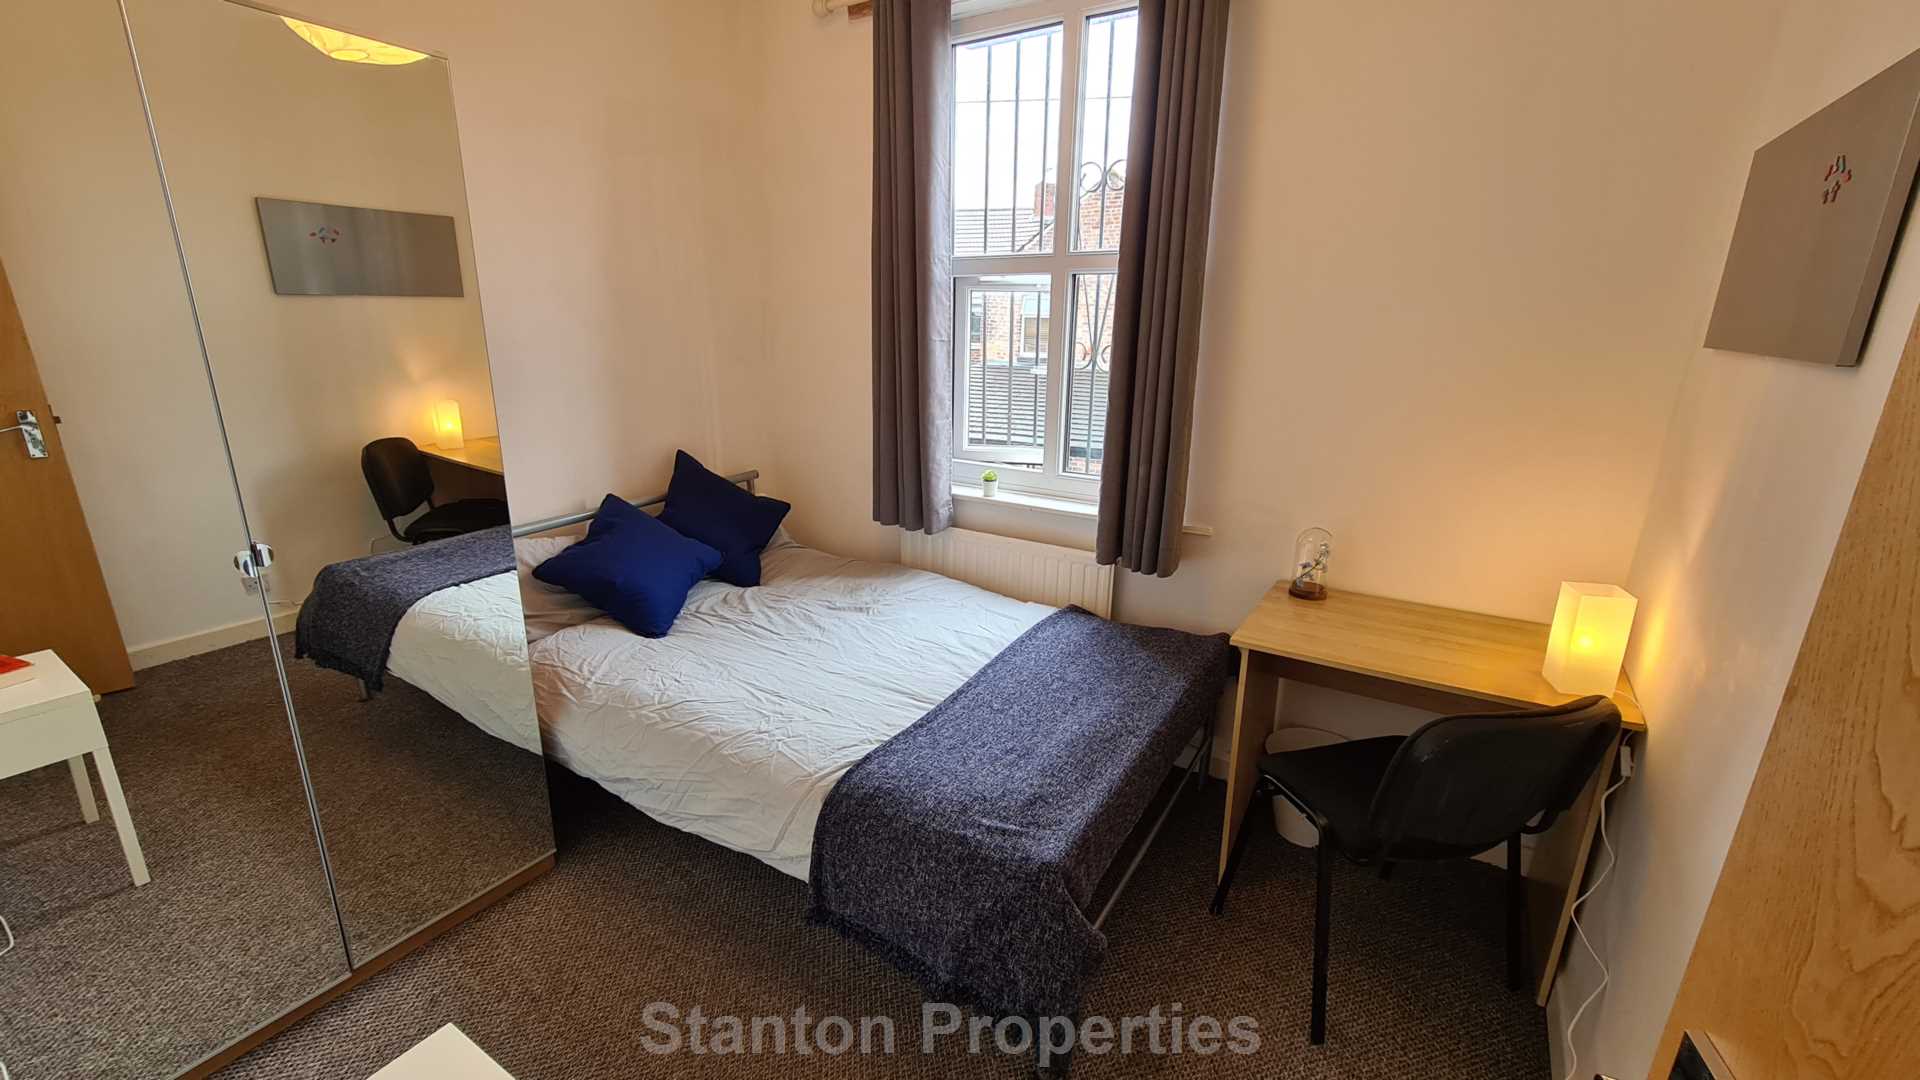 £130 pppw, See Video Tour, Mabfield Road, Fallowfield, Image 22